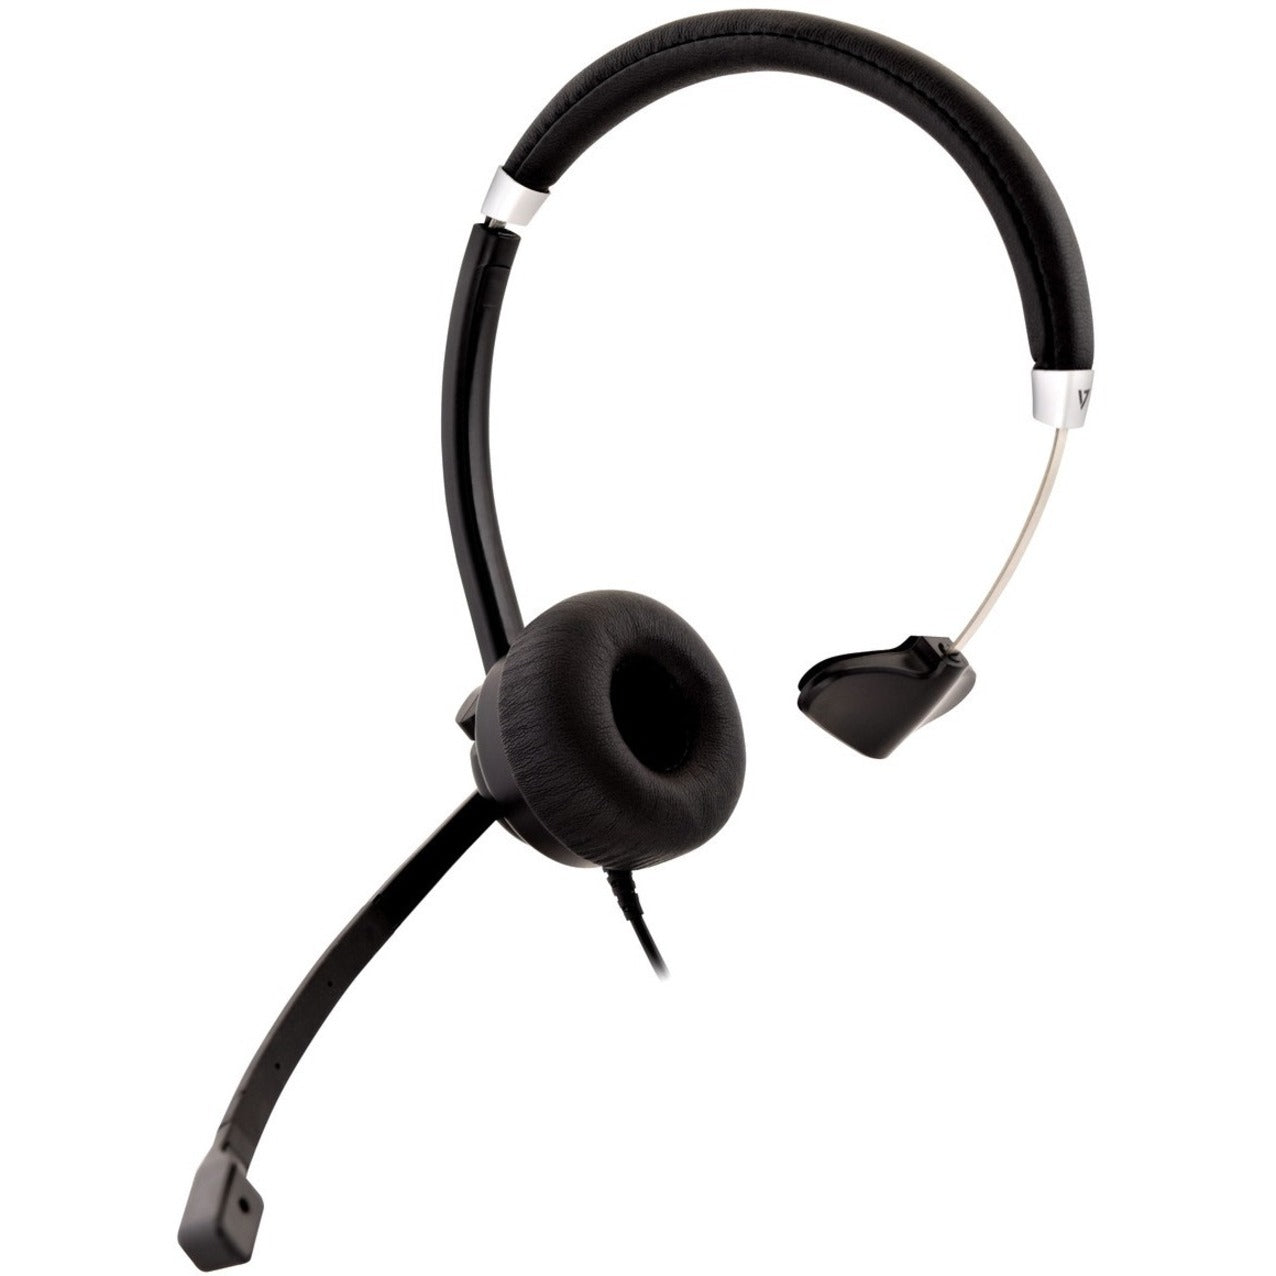 V7 HA401 Deluxe Mono Headset Over-the-head Wired Headset with Noise Cancelling Microphone V7 HA401 디럭스 모노 헤드셋 머리 위 유선 헤드셋 소음 취소 마이크 함유